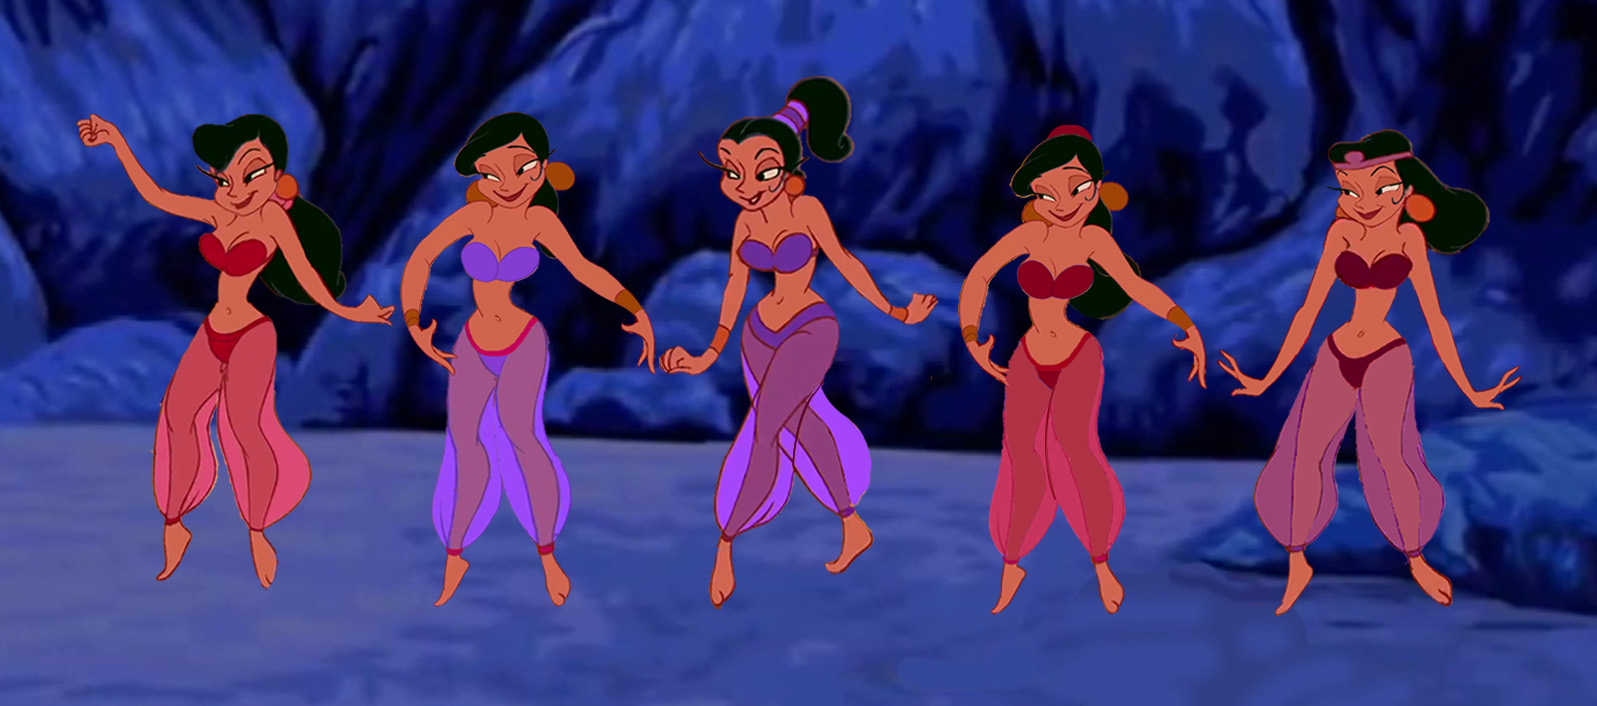 Now here are the belly dancers the Genie summoned for the song, "P...